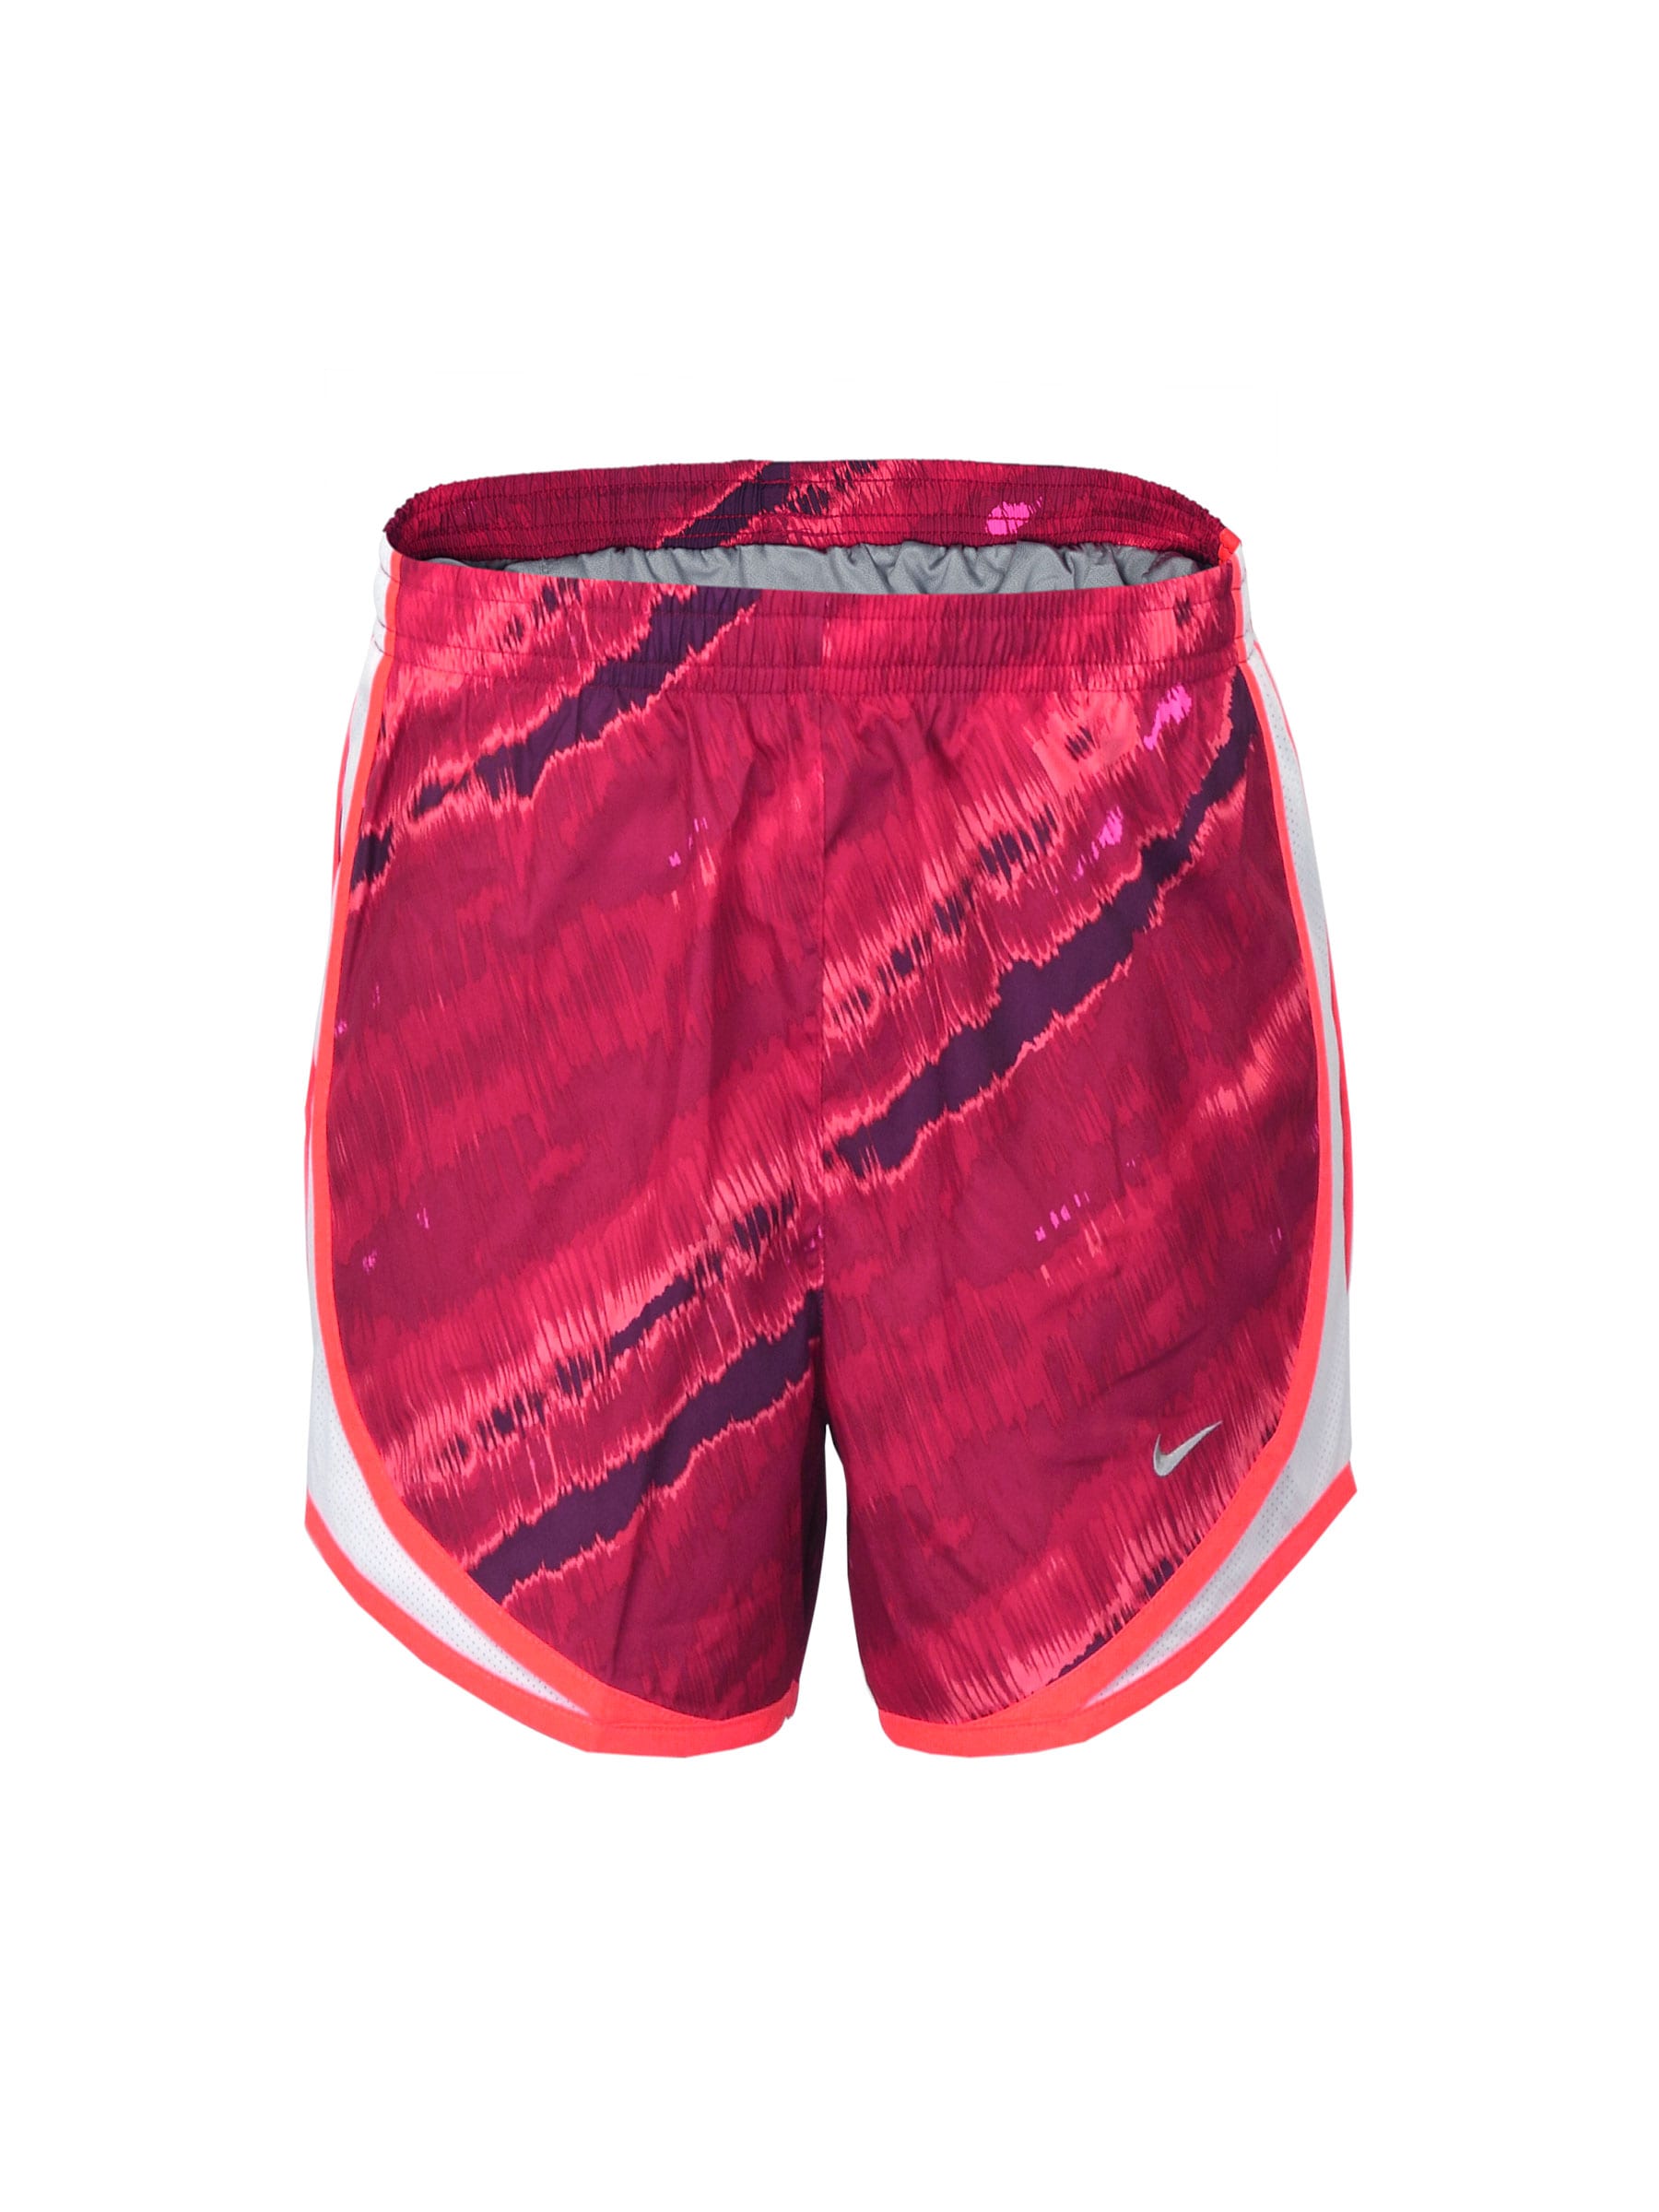 Nike Women Printed Tempo Red Shorts